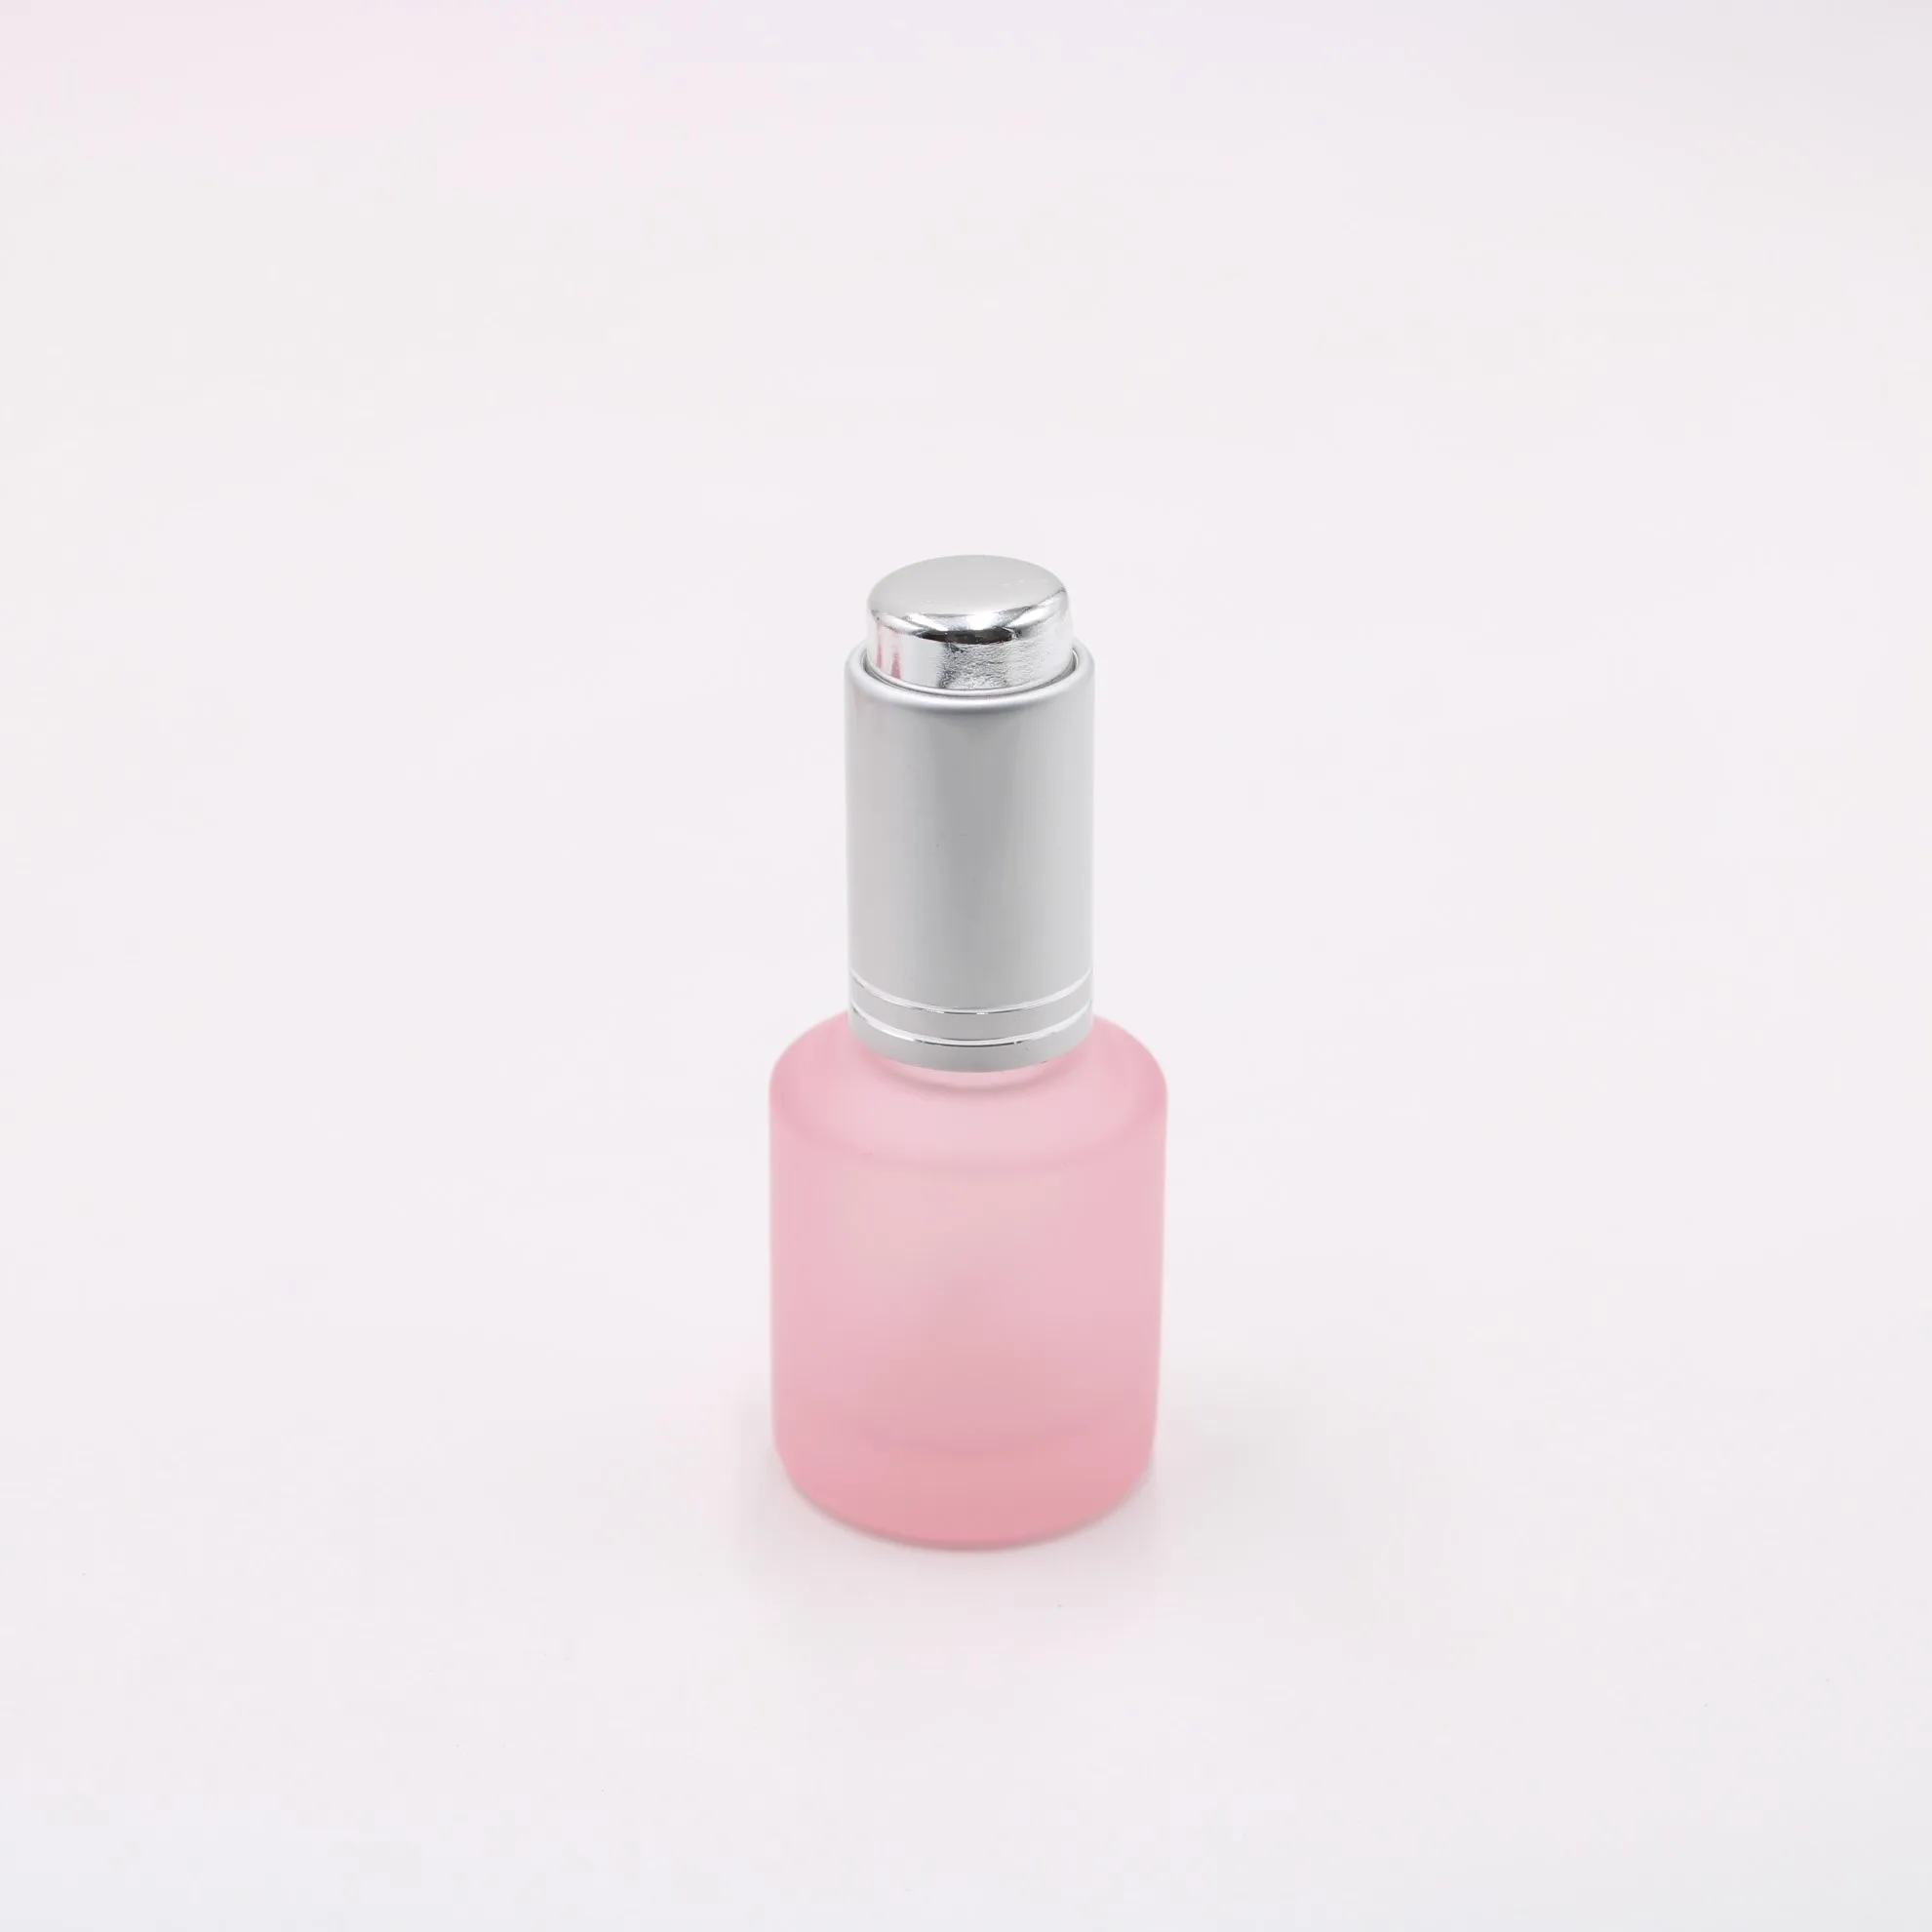 Download Frosted Pink 30ml Glass Dropper Bottle Essential Oil Glass Bottle Cosmetic Bottle With Lid Buy Glass Bottle Dropper Pink Essential Oil Glass Bottle Essential Oil Bottle 15ml Product On Alibaba Com